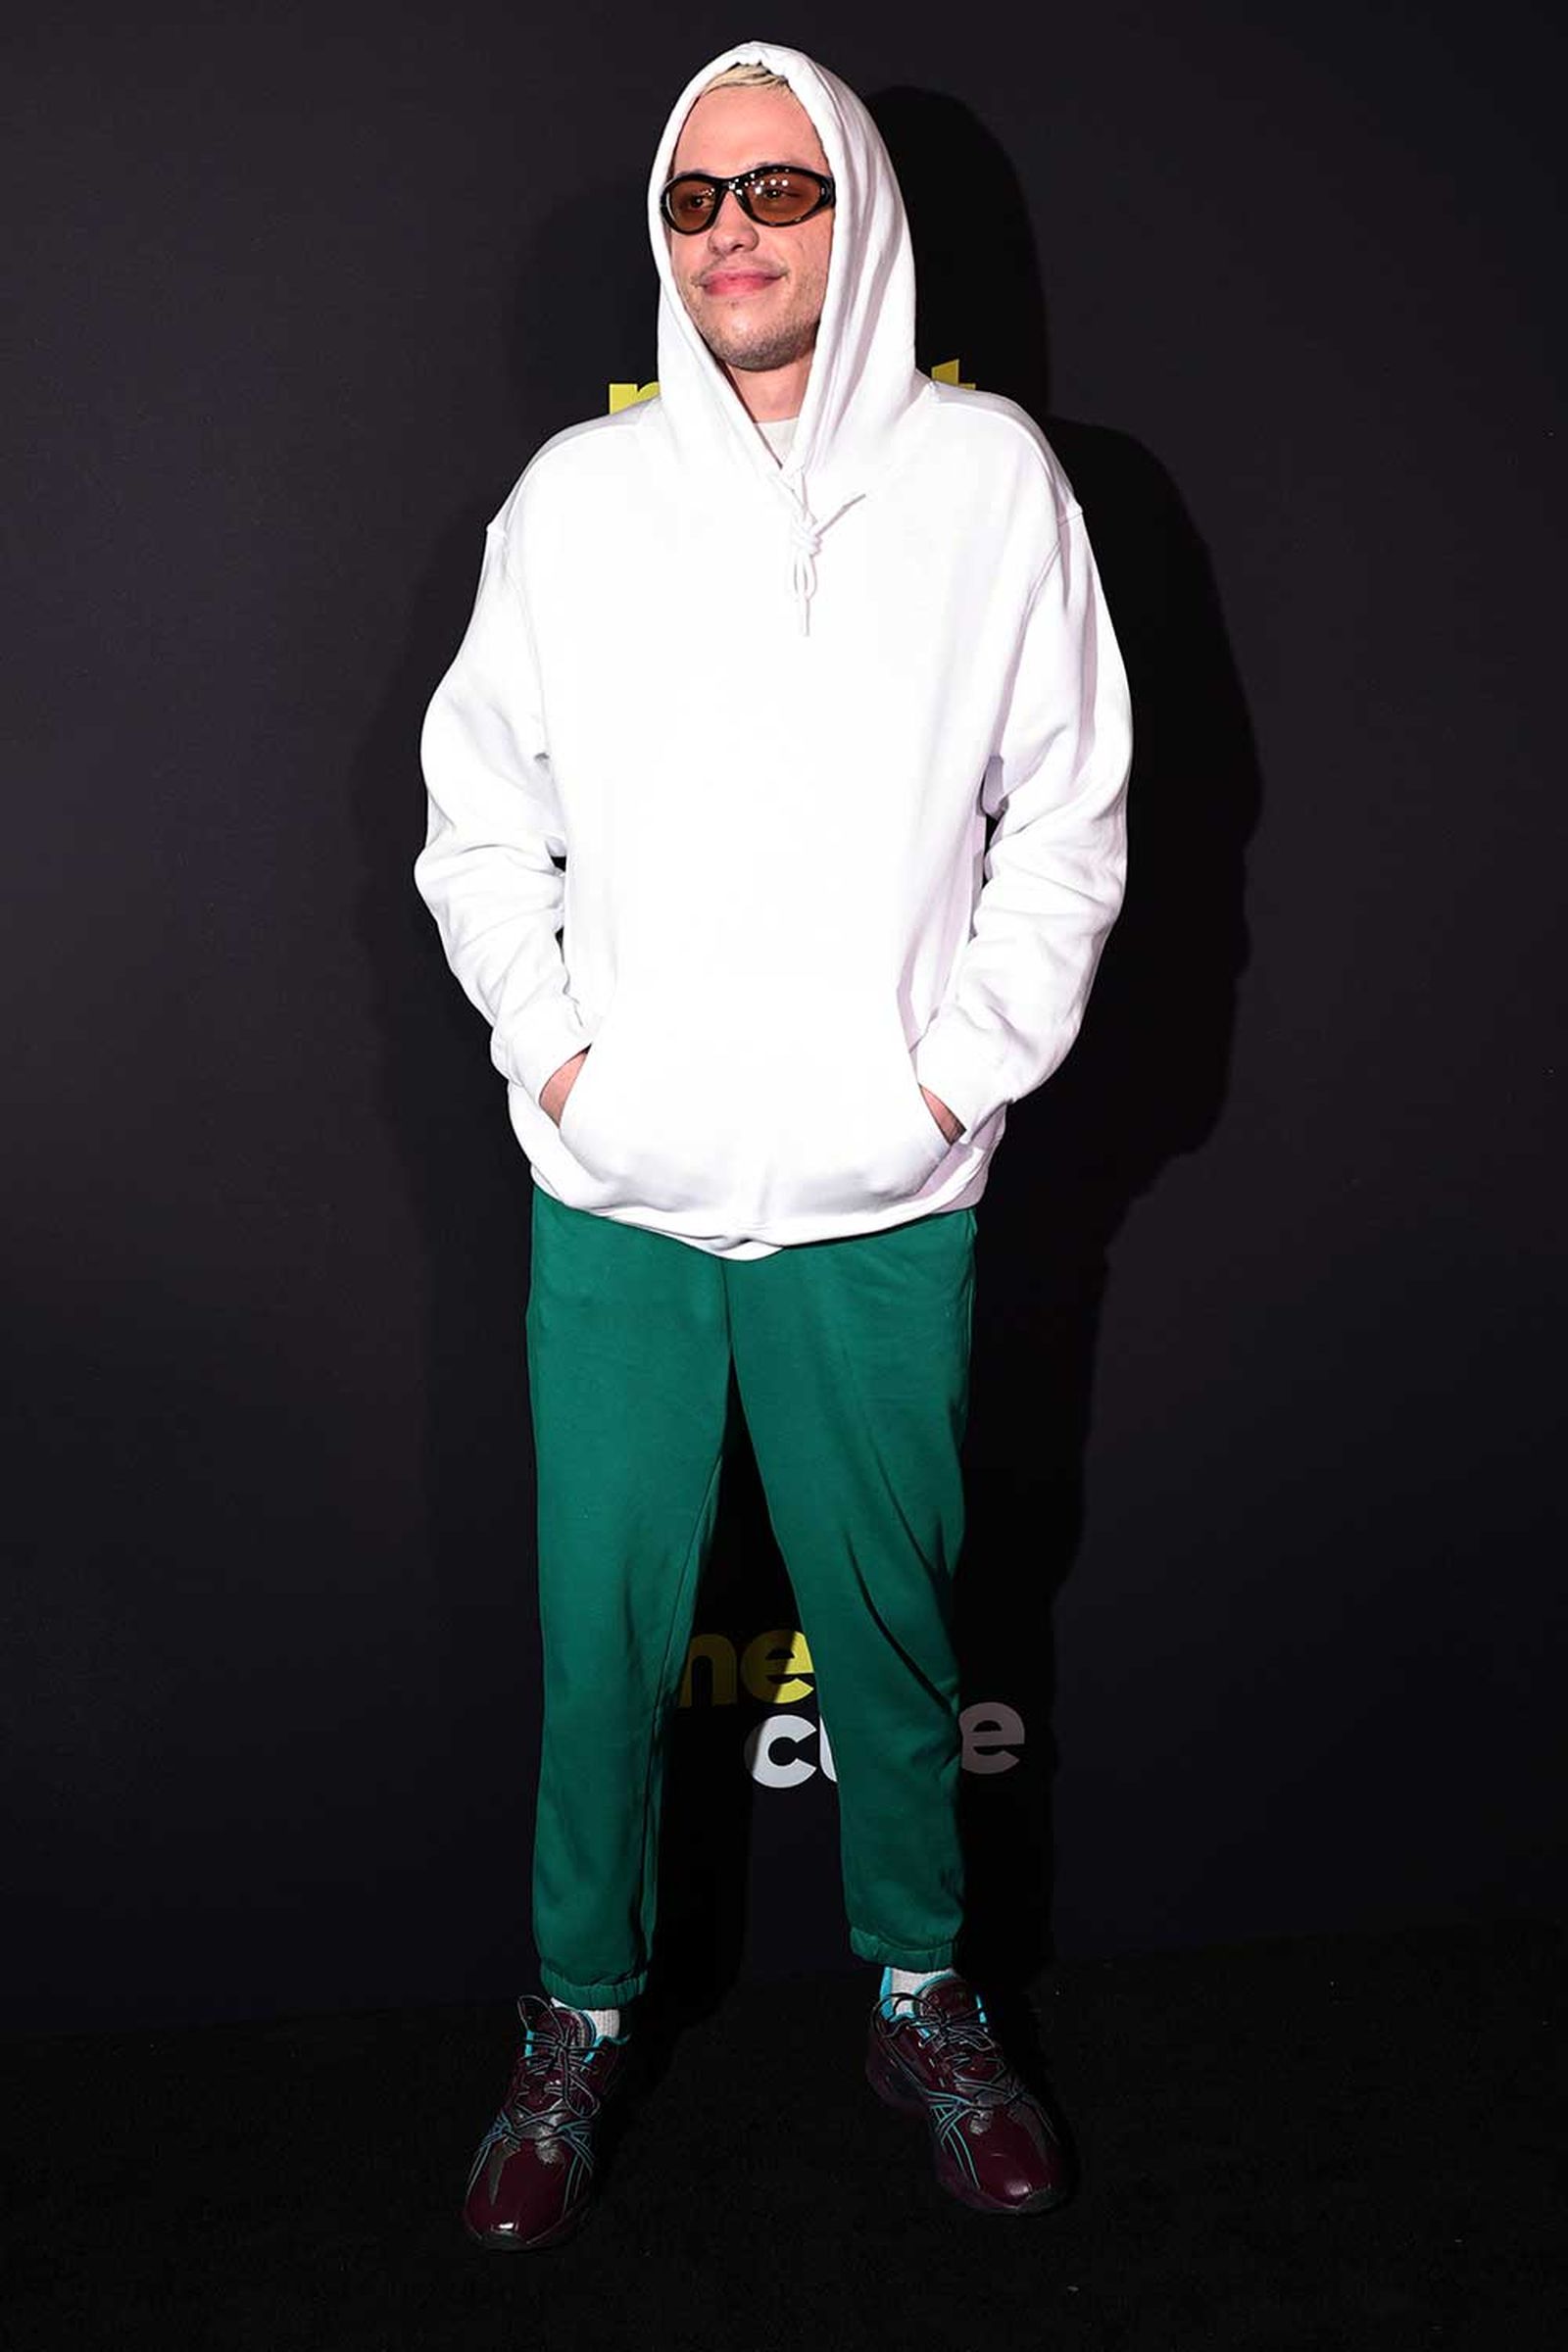 pete-davidson-hm-hoodie-red-carpet-outfit-2022-2